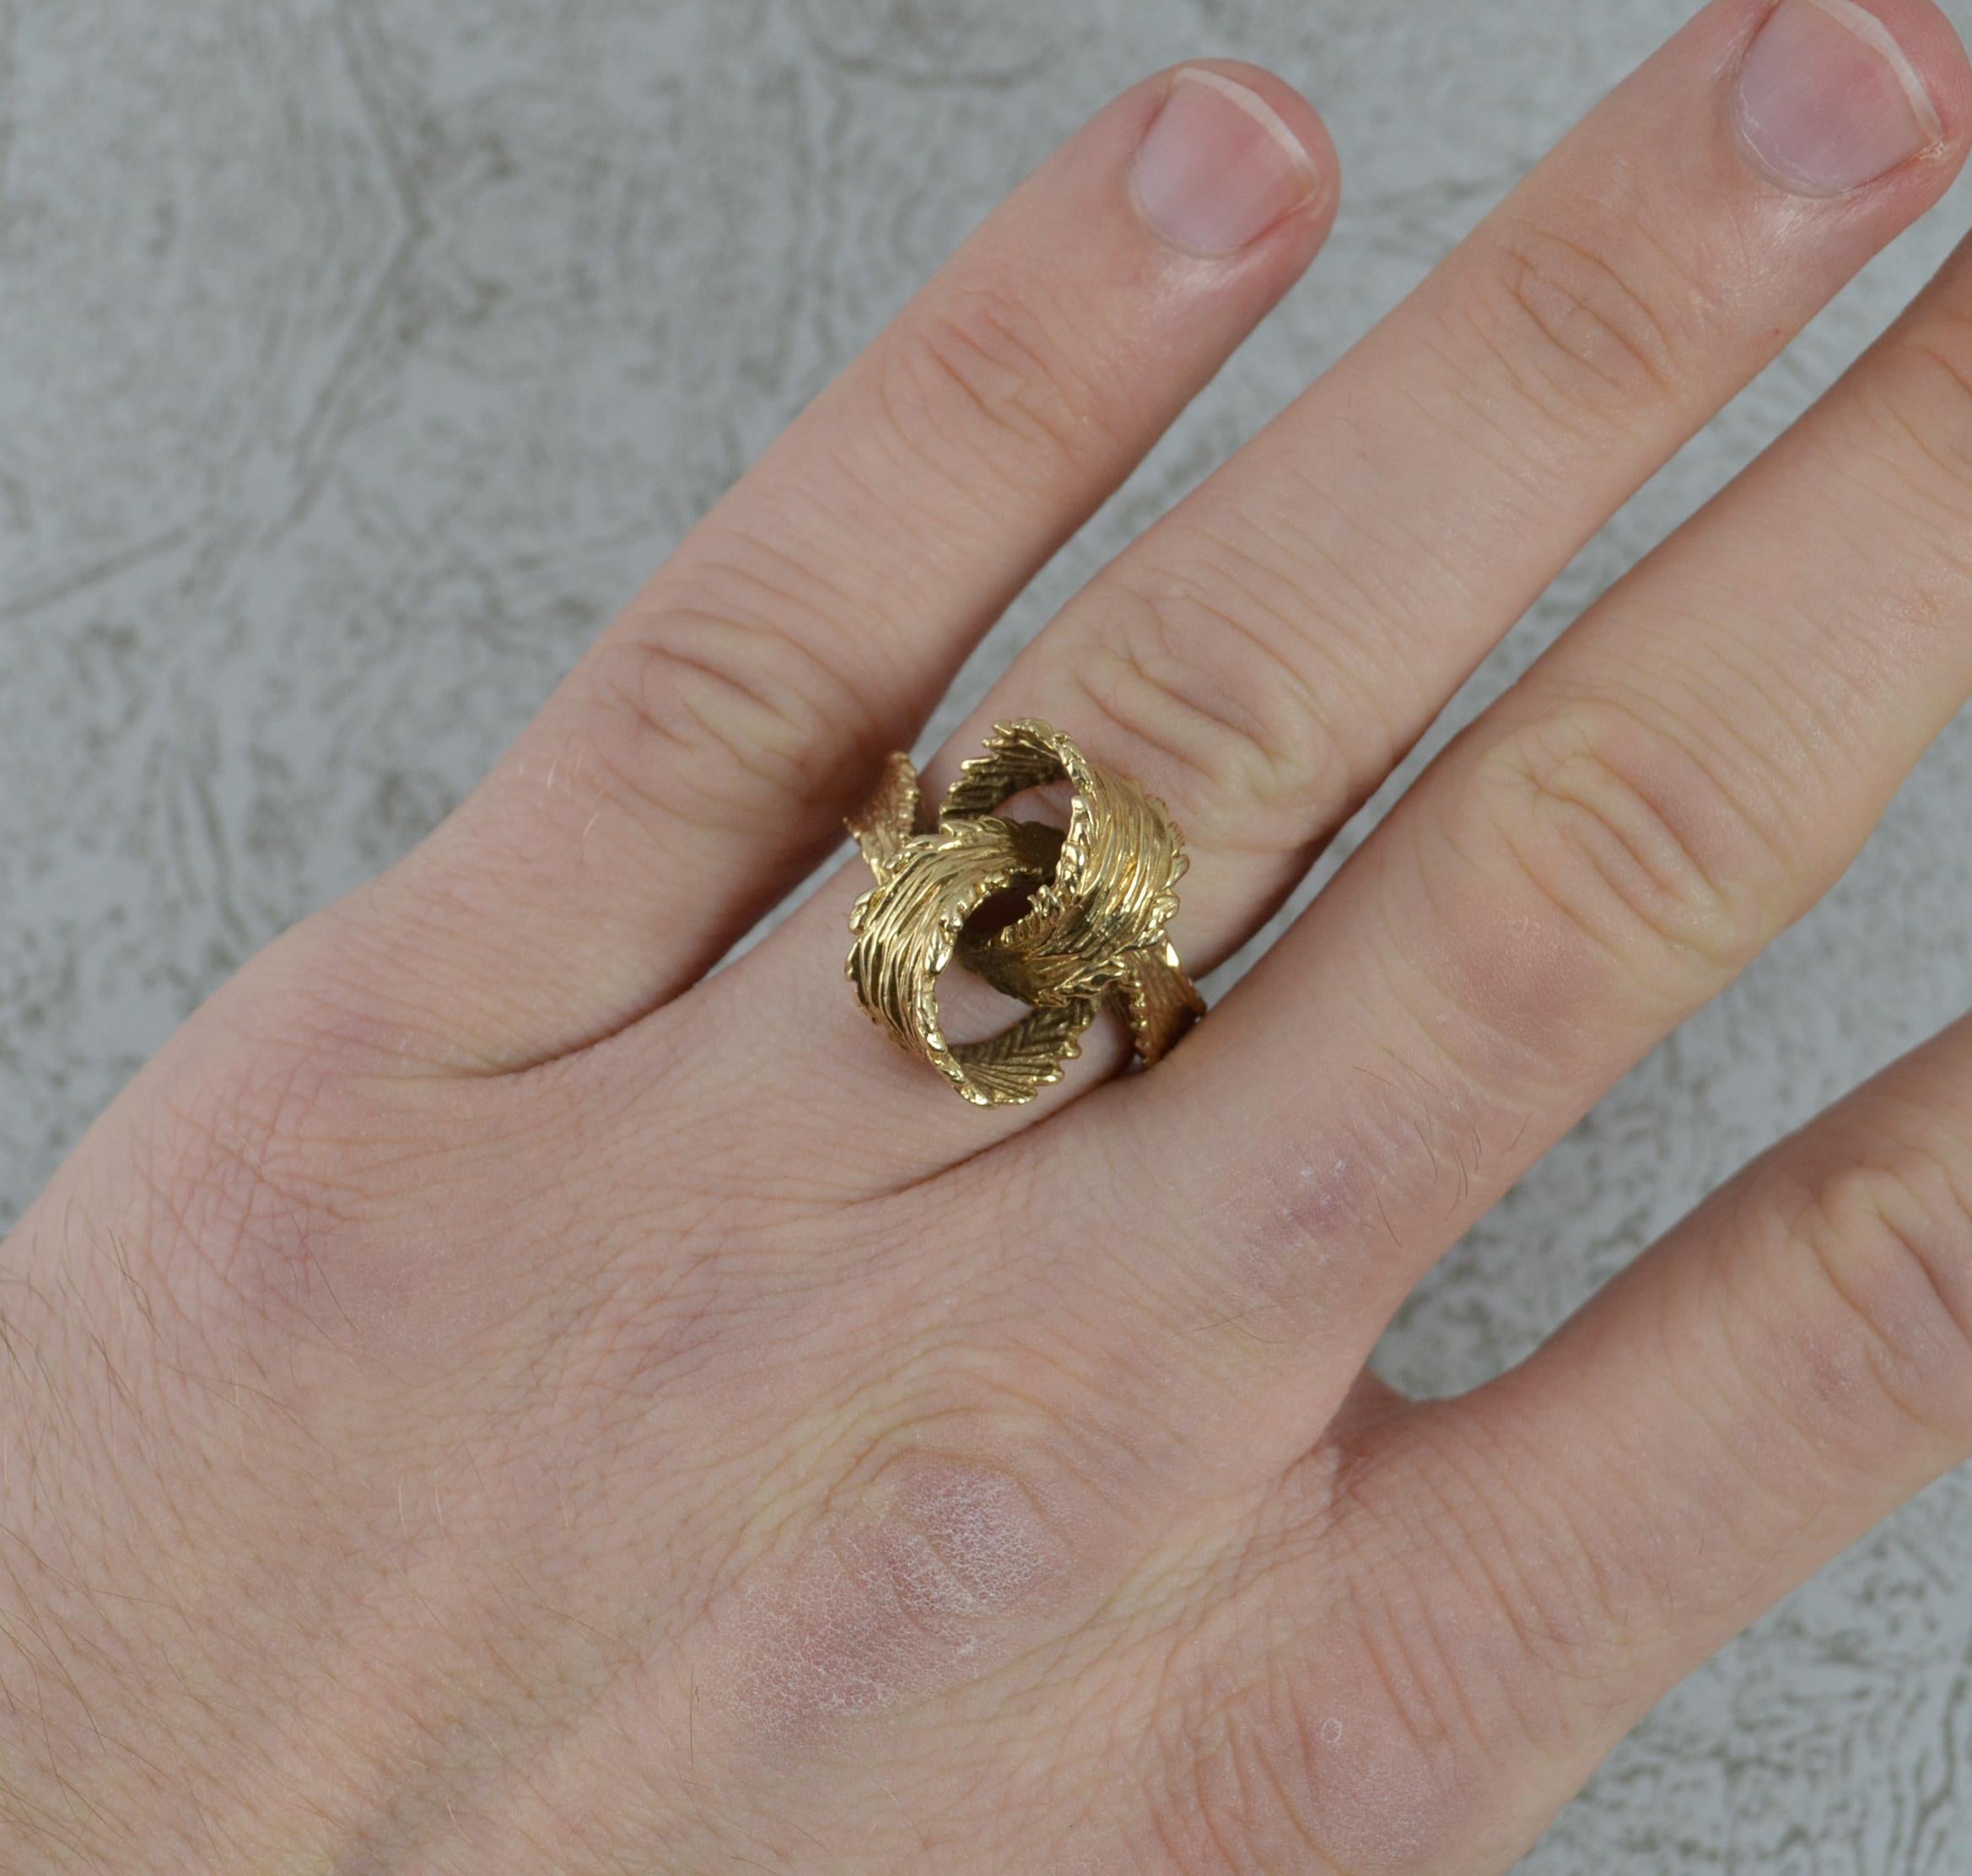 A superb solid 9 carat yellow gold ring. Stylish entwined knot design. 18mm wide band to front.

Condition ; Very good. Strong, round band. Crisp design. Possible resizing to reverse of band.

Please view photographs though note they are